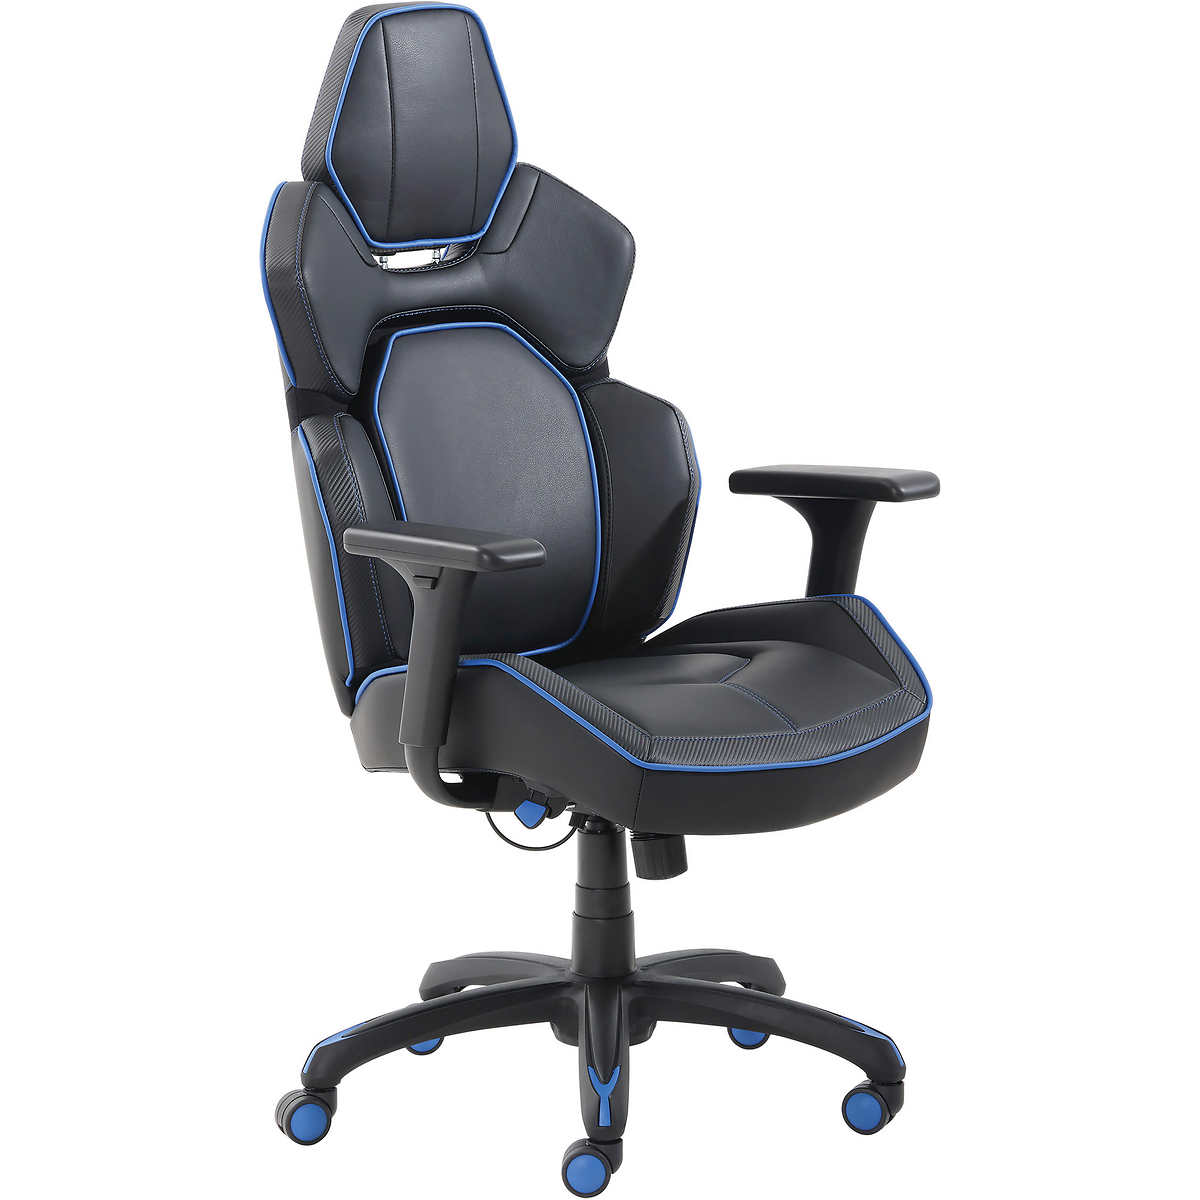 Dps 3d Insight Gaming Chair With Adjustable Headrest Costco